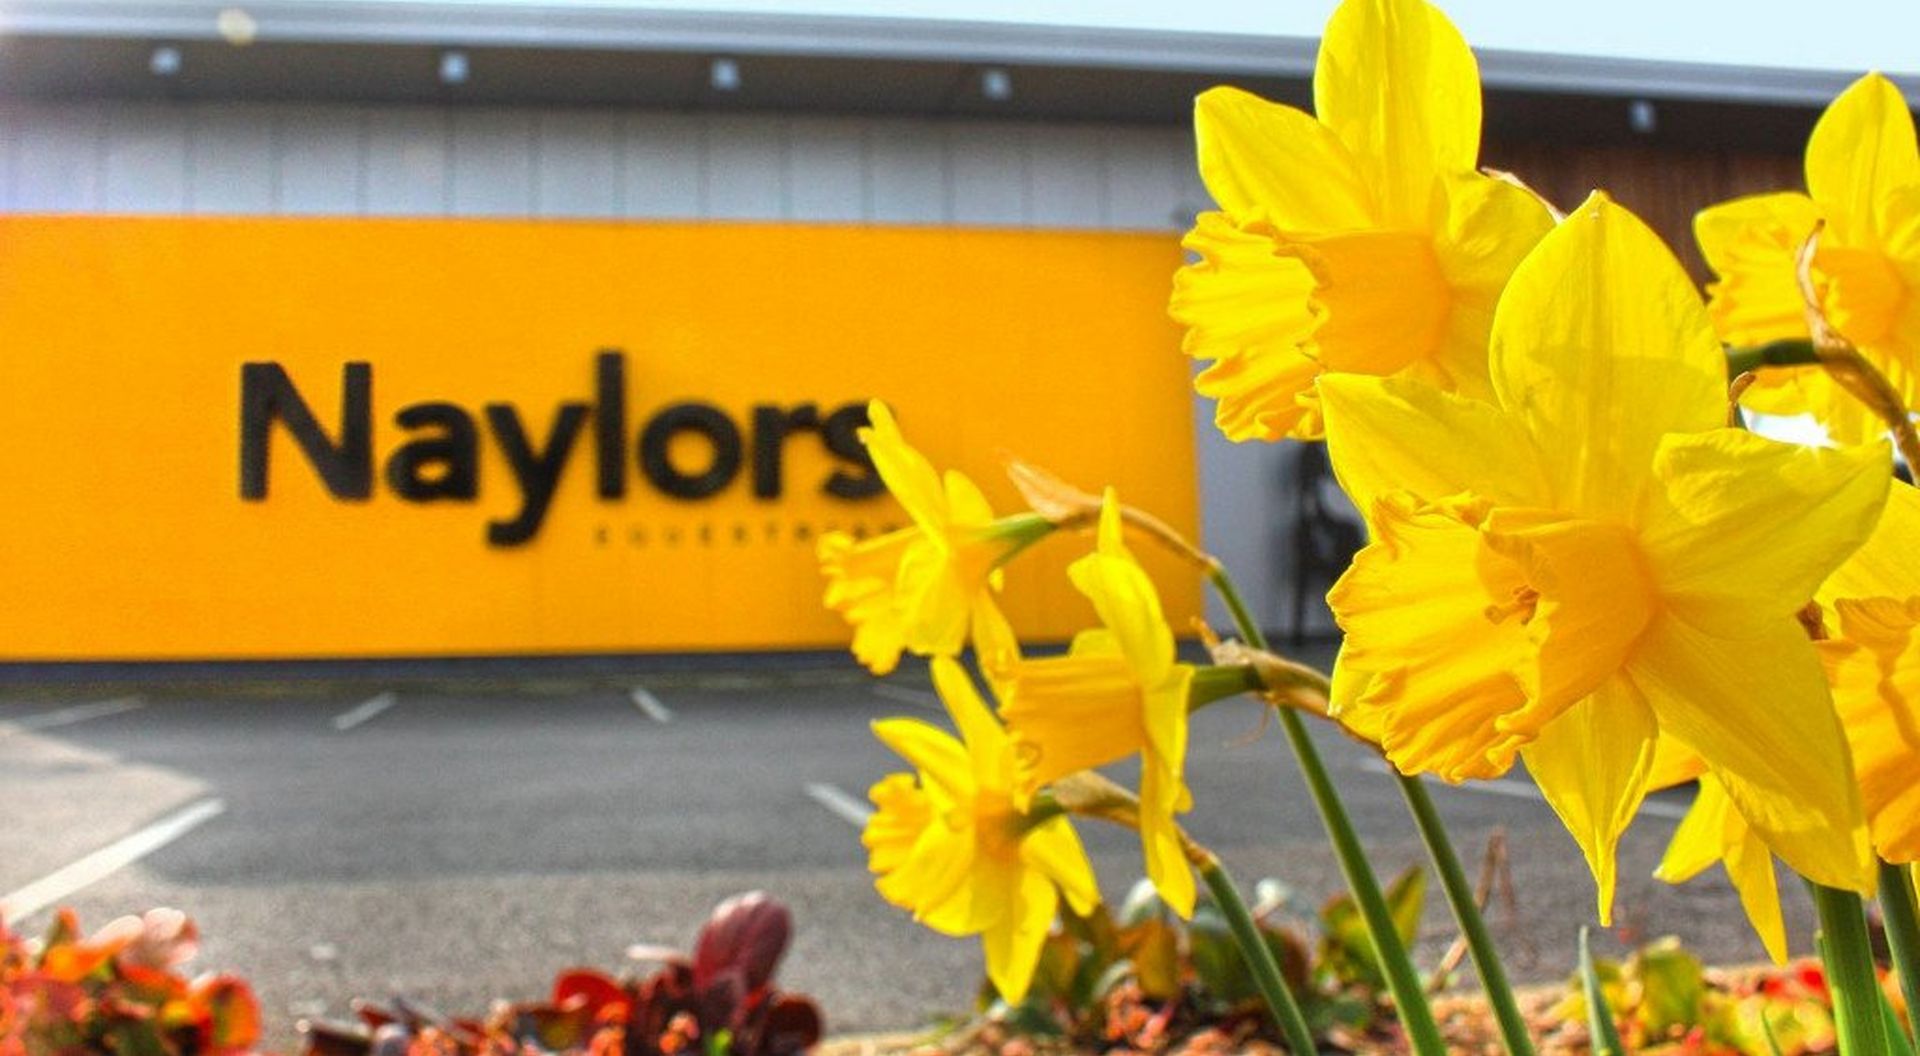 Naylors at GO Outdoors - New Stores Opening This Spring